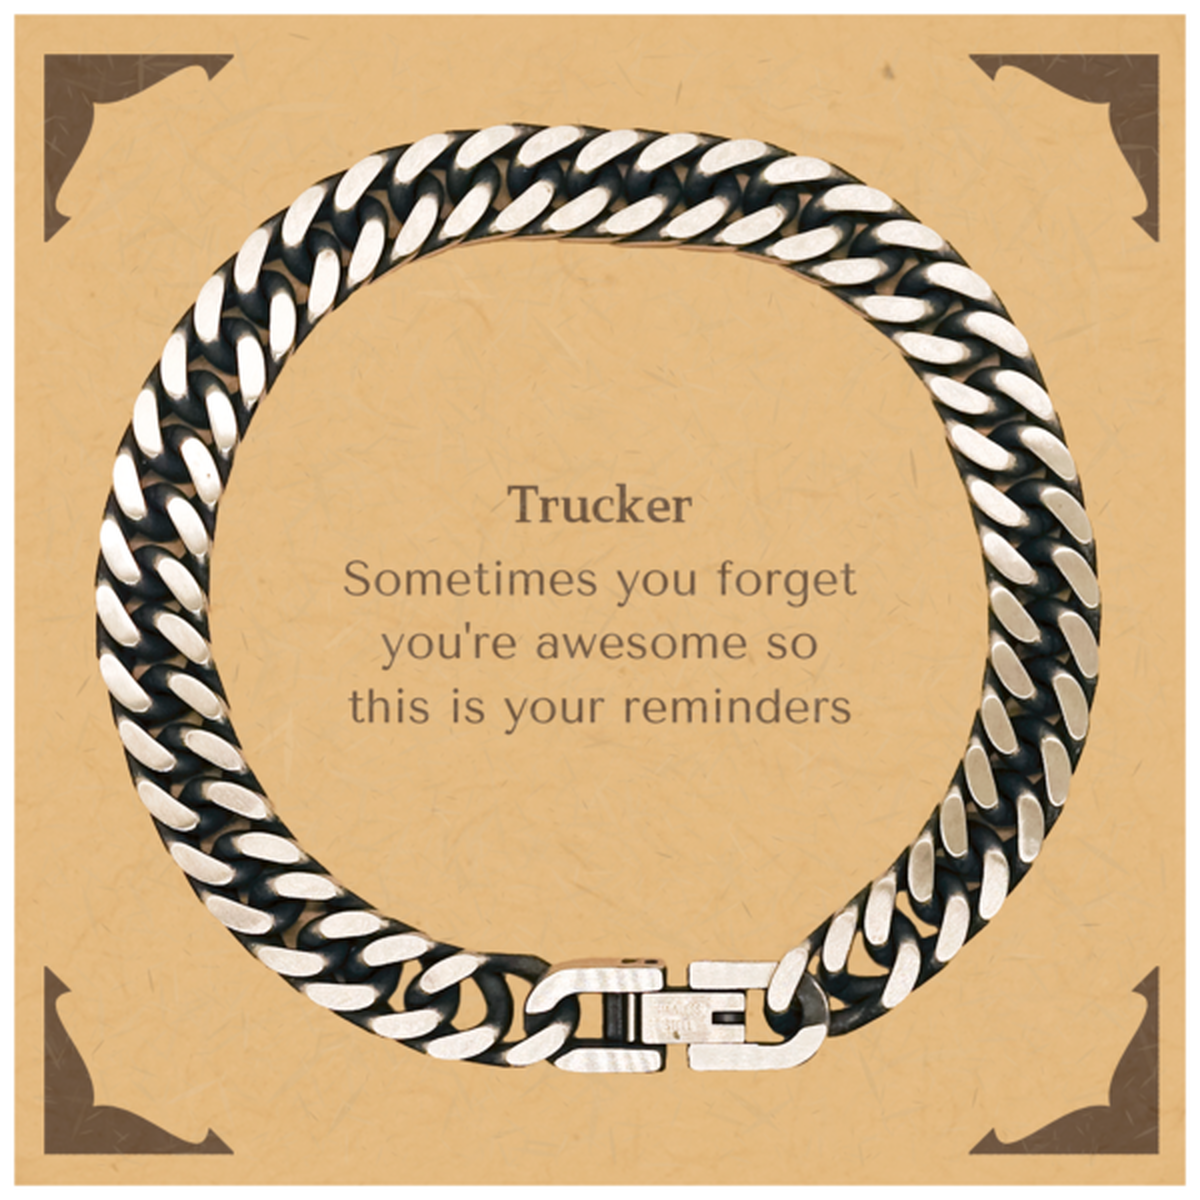 Sentimental Trucker Cuban Link Chain Bracelet, Trucker Sometimes you forget you're awesome so this is your reminders, Graduation Christmas Birthday Gifts for Trucker, Men, Women, Coworkers